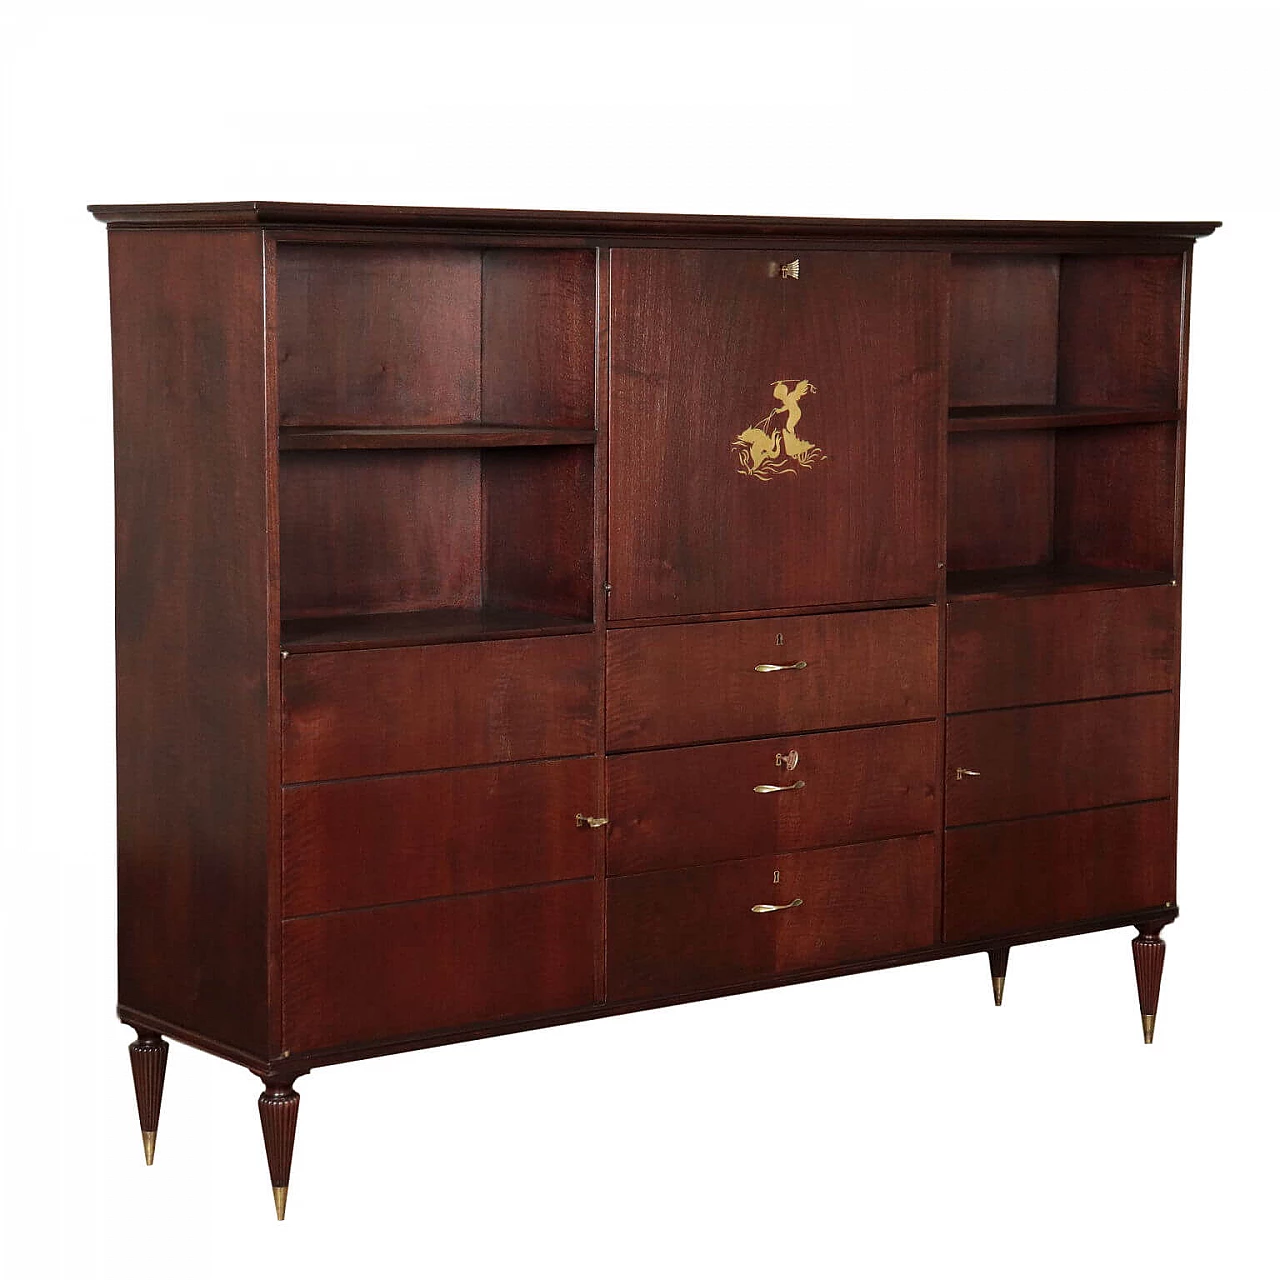 Cabinet with central bar compartment, 1950s 1